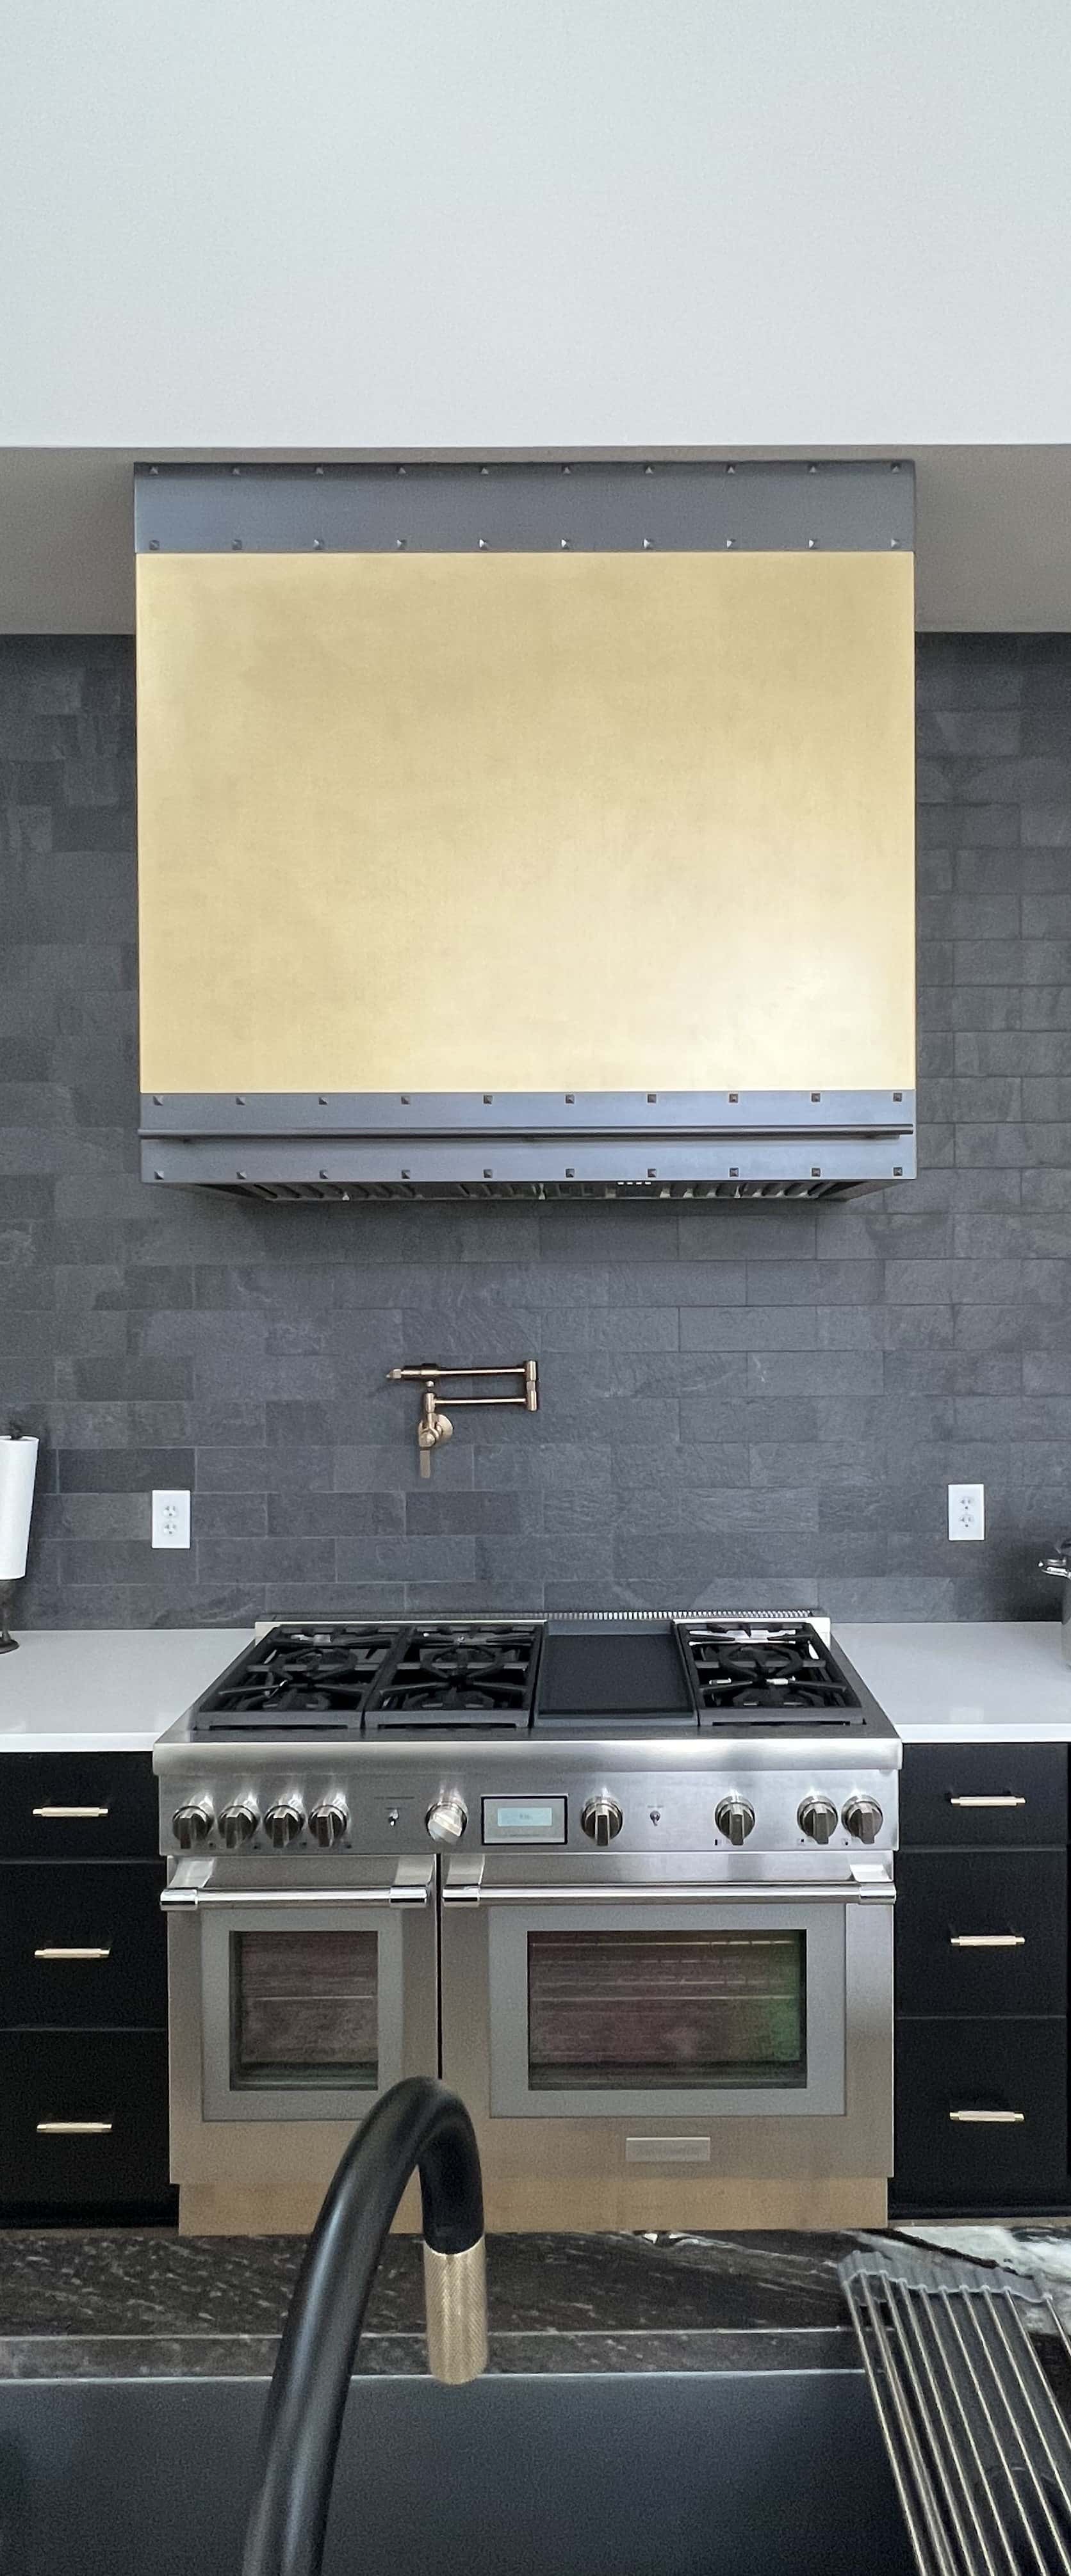 Range hood meet sleek sophistication, elevate space with striking black kitchen cabinets and pristine white kitchen countertops